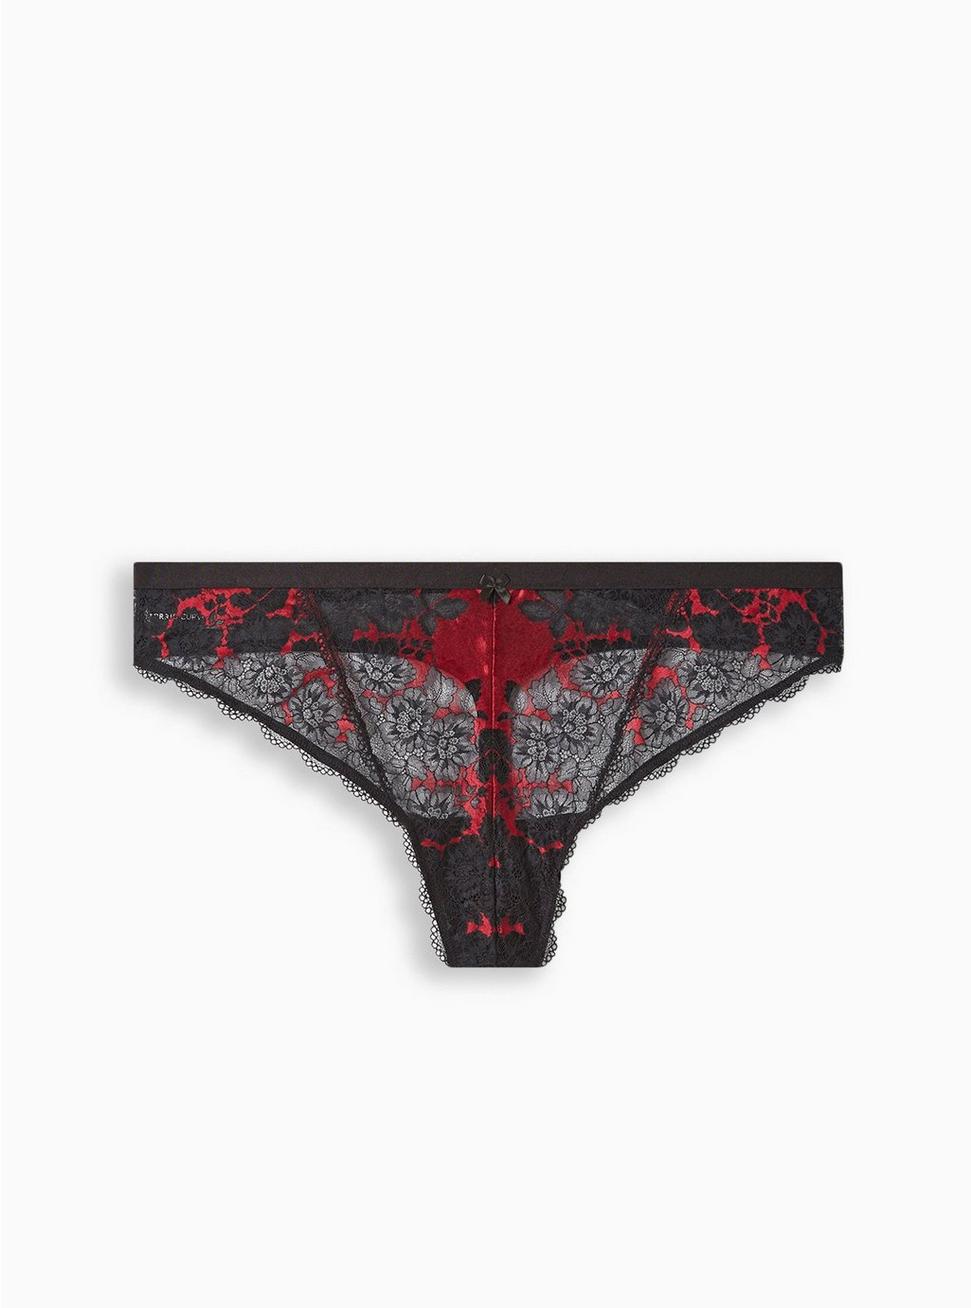 Two Tone Lace Mid-Rise Thong Panty, JESTER RED, hi-res